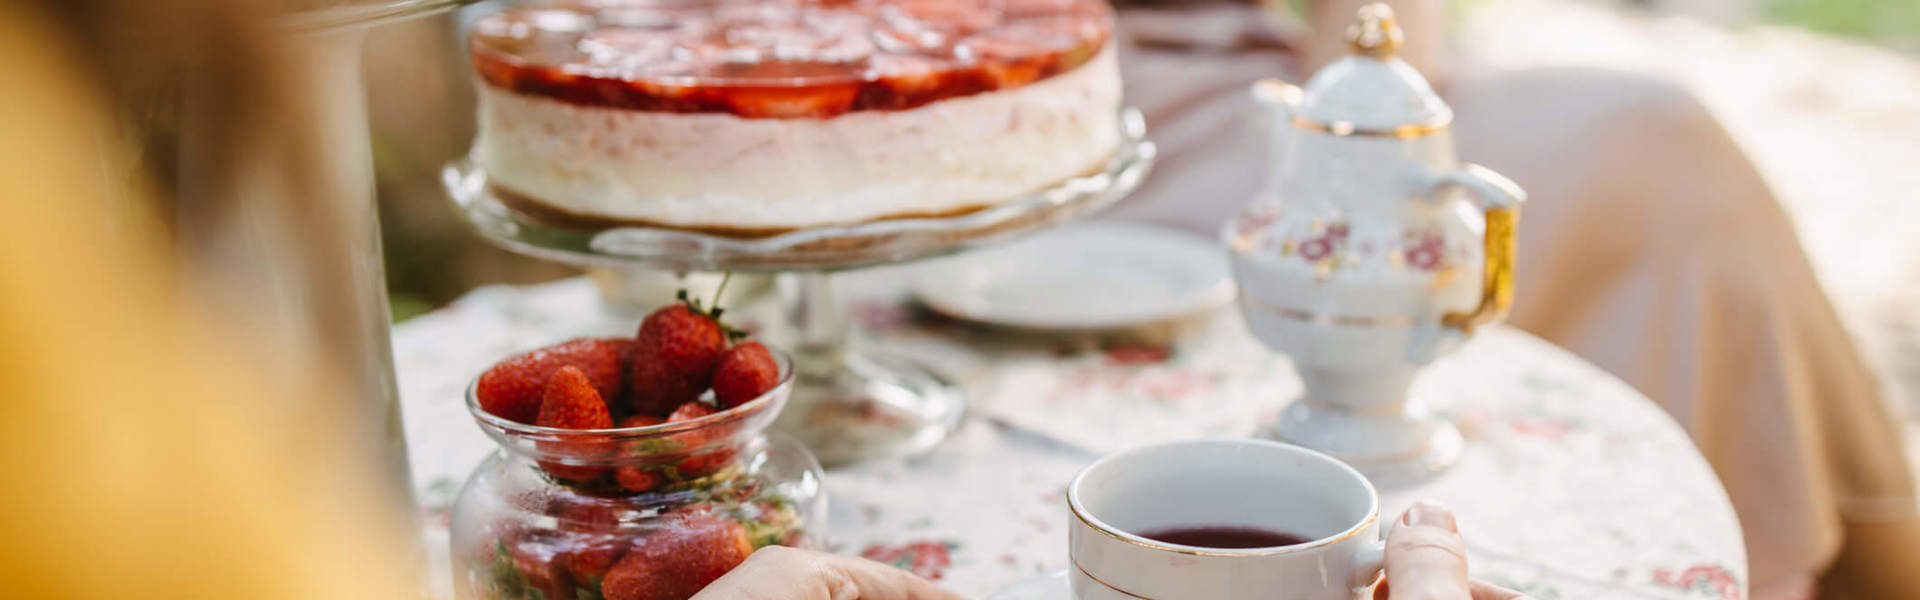 a traditional English afternoon tea table spread with a teacup and saucer, a strawberry cake and pot of fresh strawberries